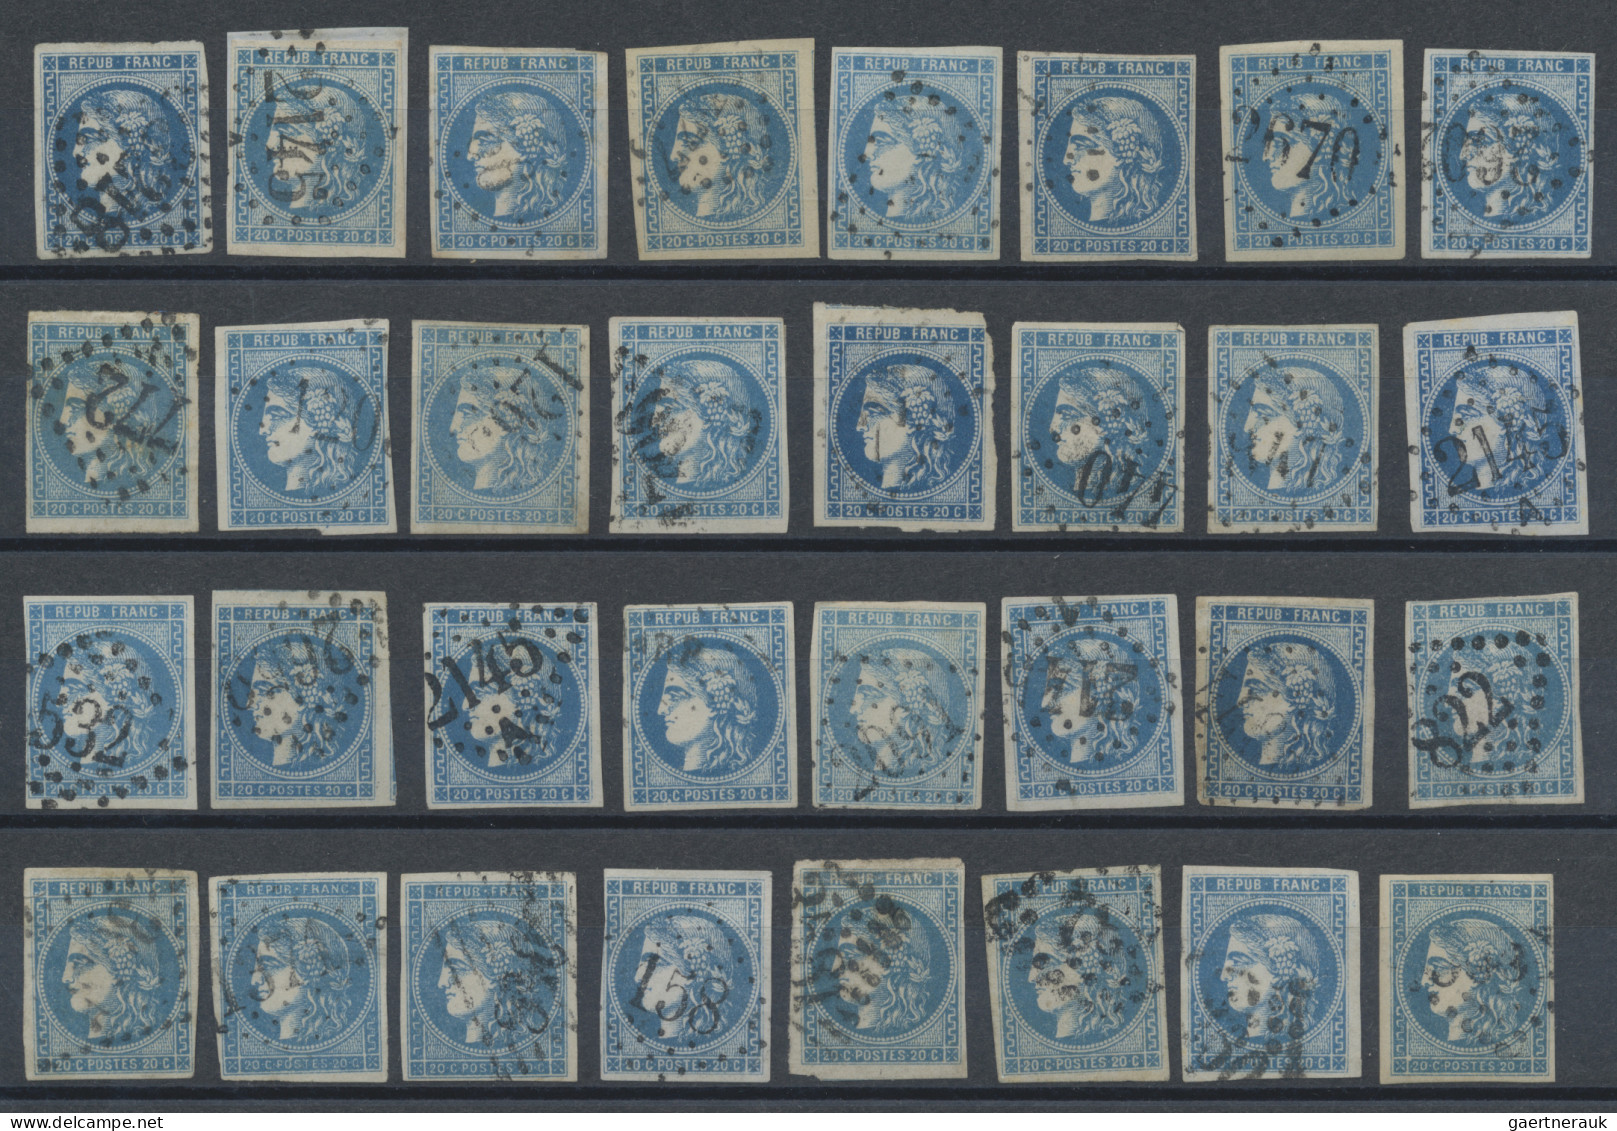 France: 1870/1871, BORDEAUX 20c. blue, specialised assortment/collection of appr